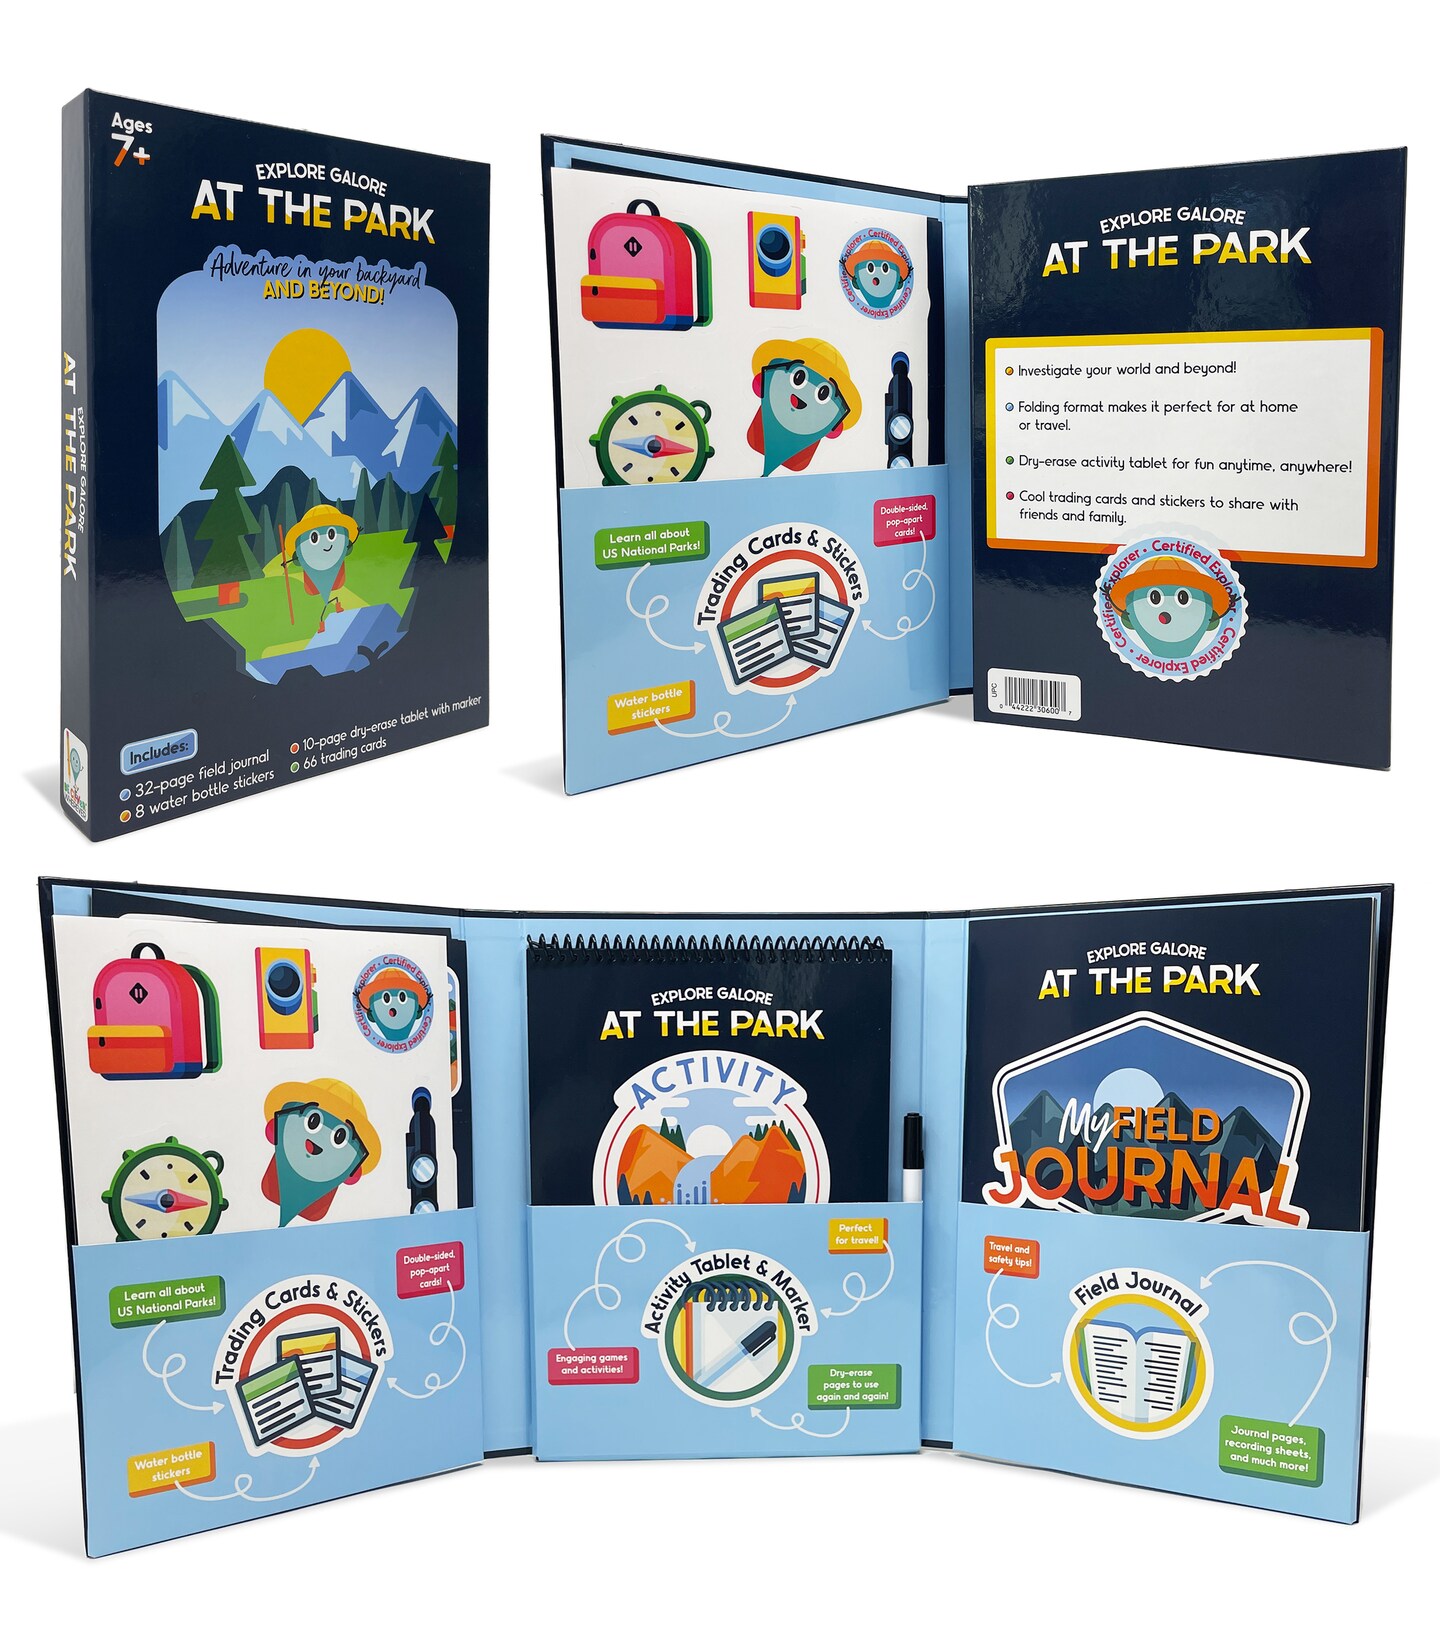 Carson Dellosa Explore Galore: At The Park Wipe Clean Activity Book for Kids Ages 7+, National Parks Dry Erase Activity Book Puzzles, Bingo Games, Stickers, National Park Flash Cards and Field Journal